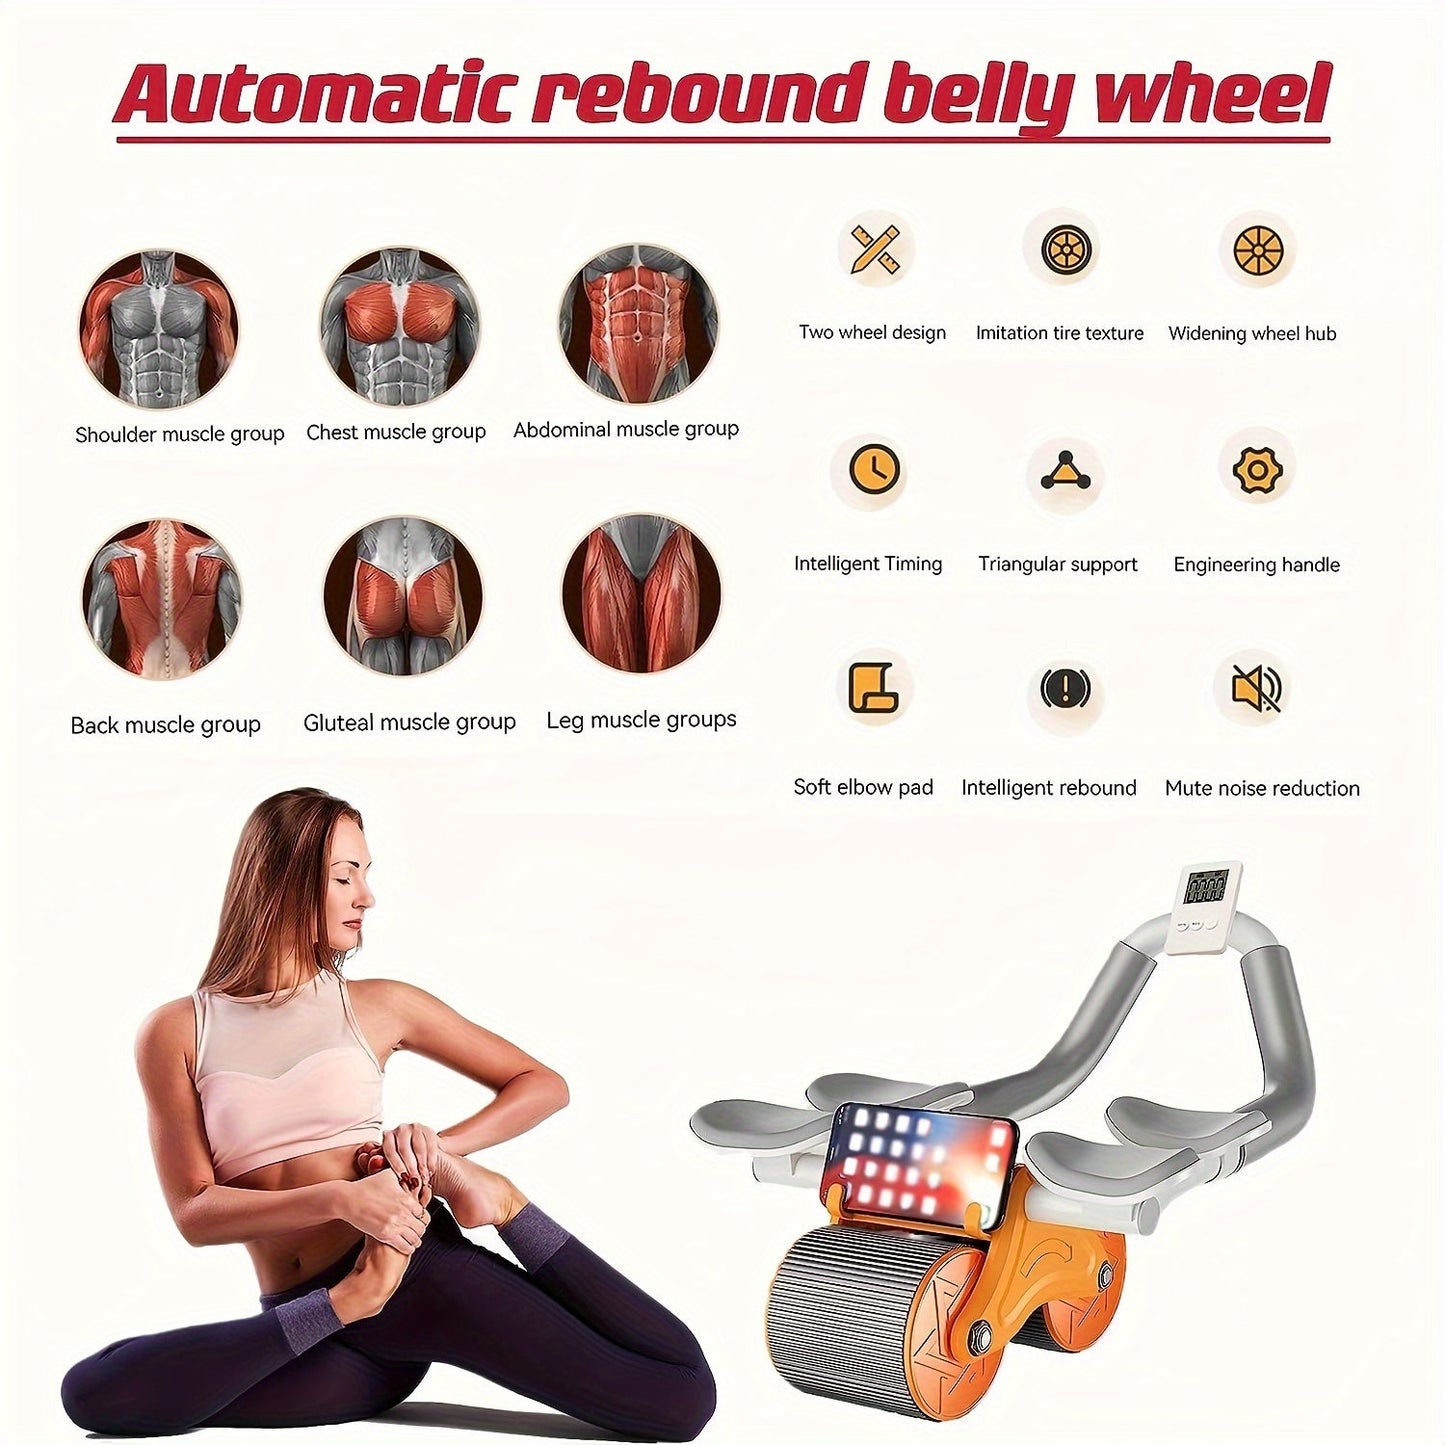 Automatic Rebound Abdominal Exercise Wheel With Knee Pads And Timer, Double Wheel Abdominal Roller, Core Strength Training Equipment